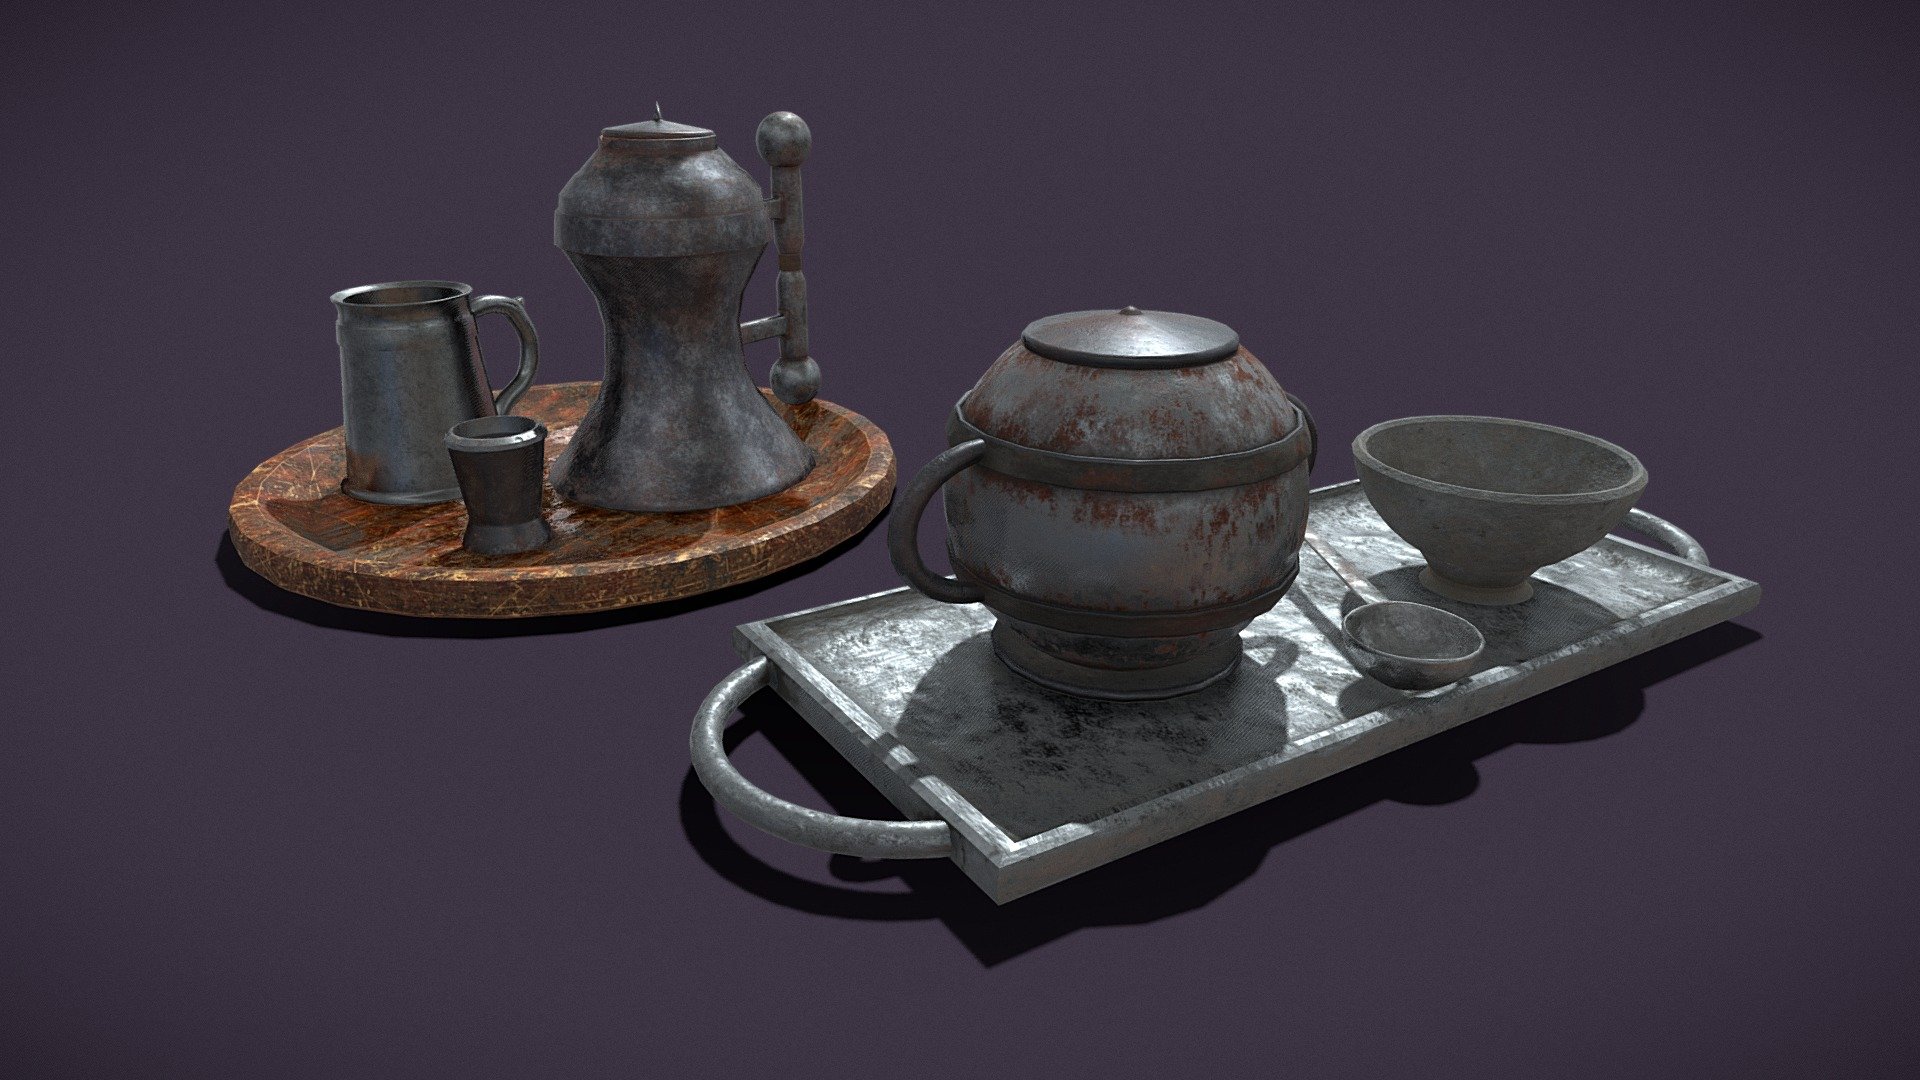 Medieval Dishes Set 3D Props Pack

Scaled to real world scale From the Creators at Get Dead Entertainment. Please like and Rate! Follow us on FaceBook and Instagram to keep updated on all our newest models. https://www.facebook.com/GetDeadEntertainment/ - Medieval Dishes Set - Buy Royalty Free 3D model by GetDeadEntertainment 3d model